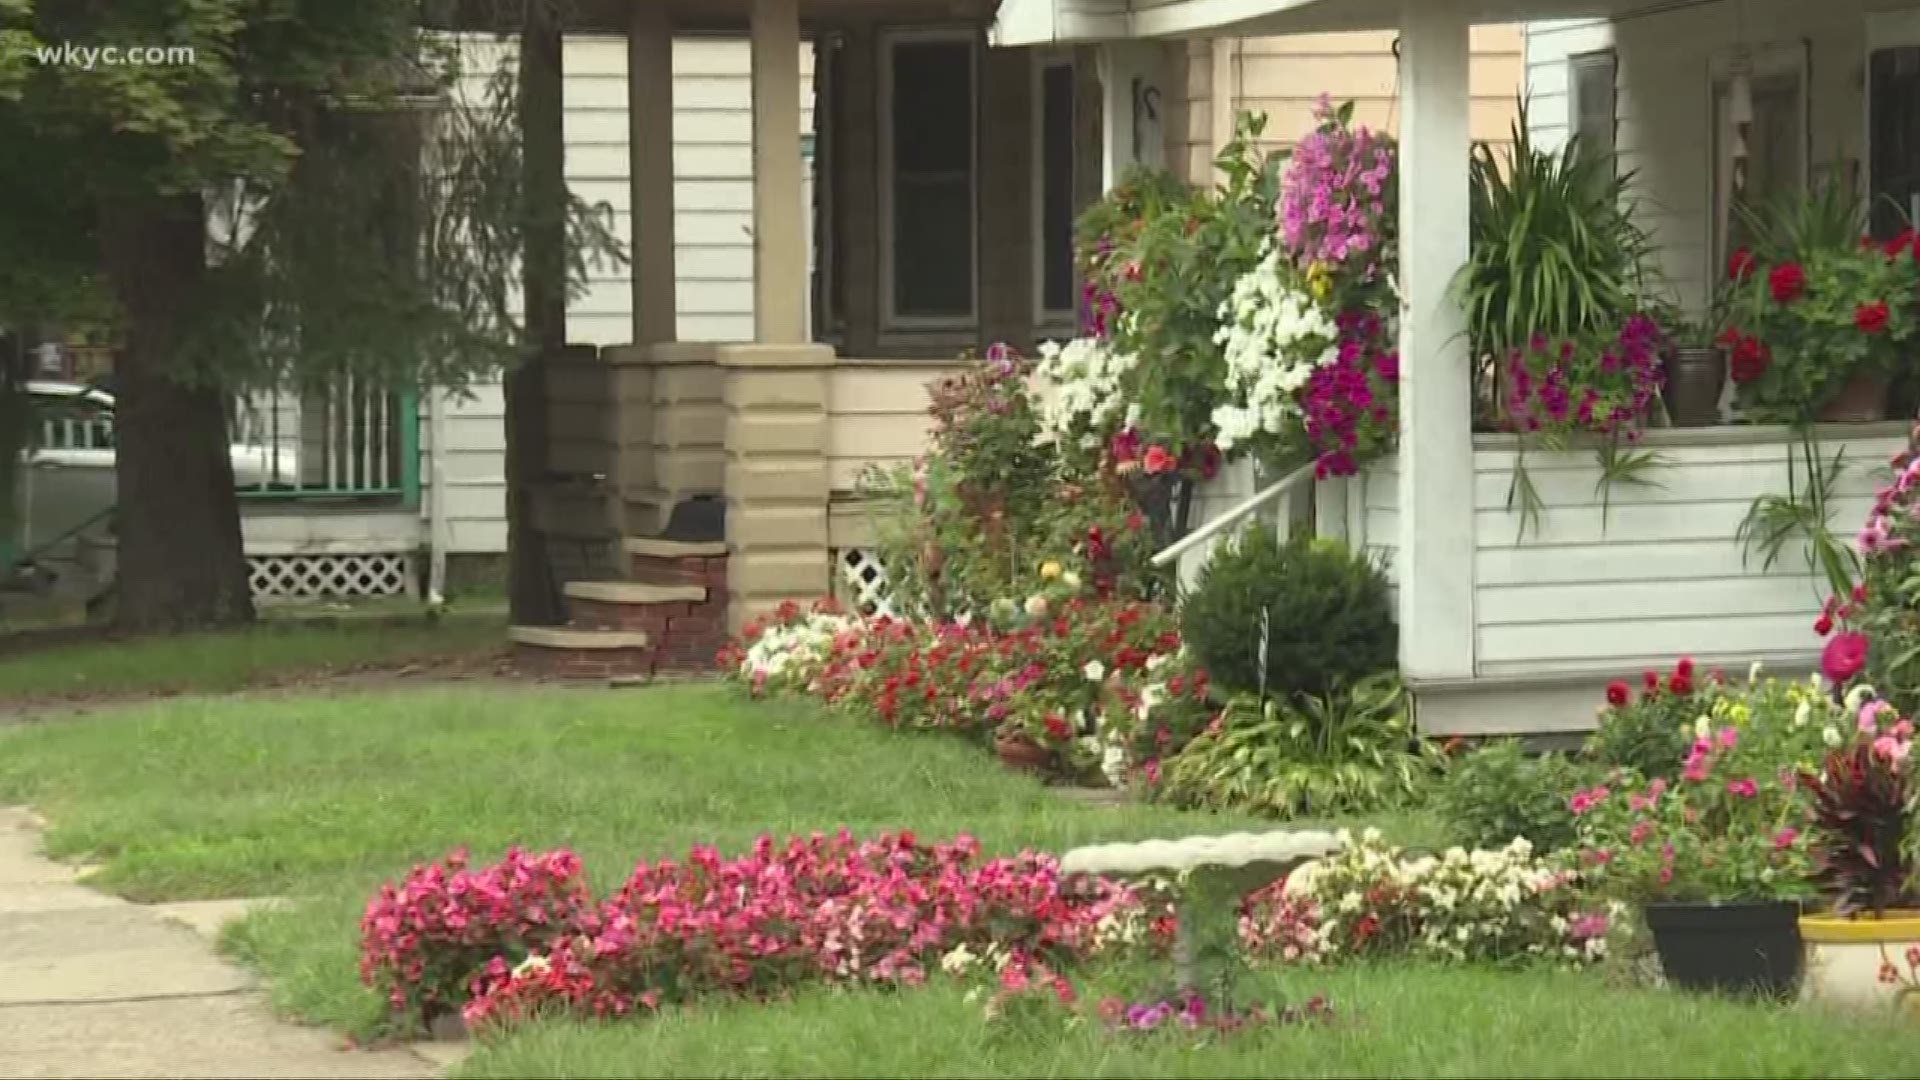 Slavic Village reacts after 94-year-old woman killed in home invasion